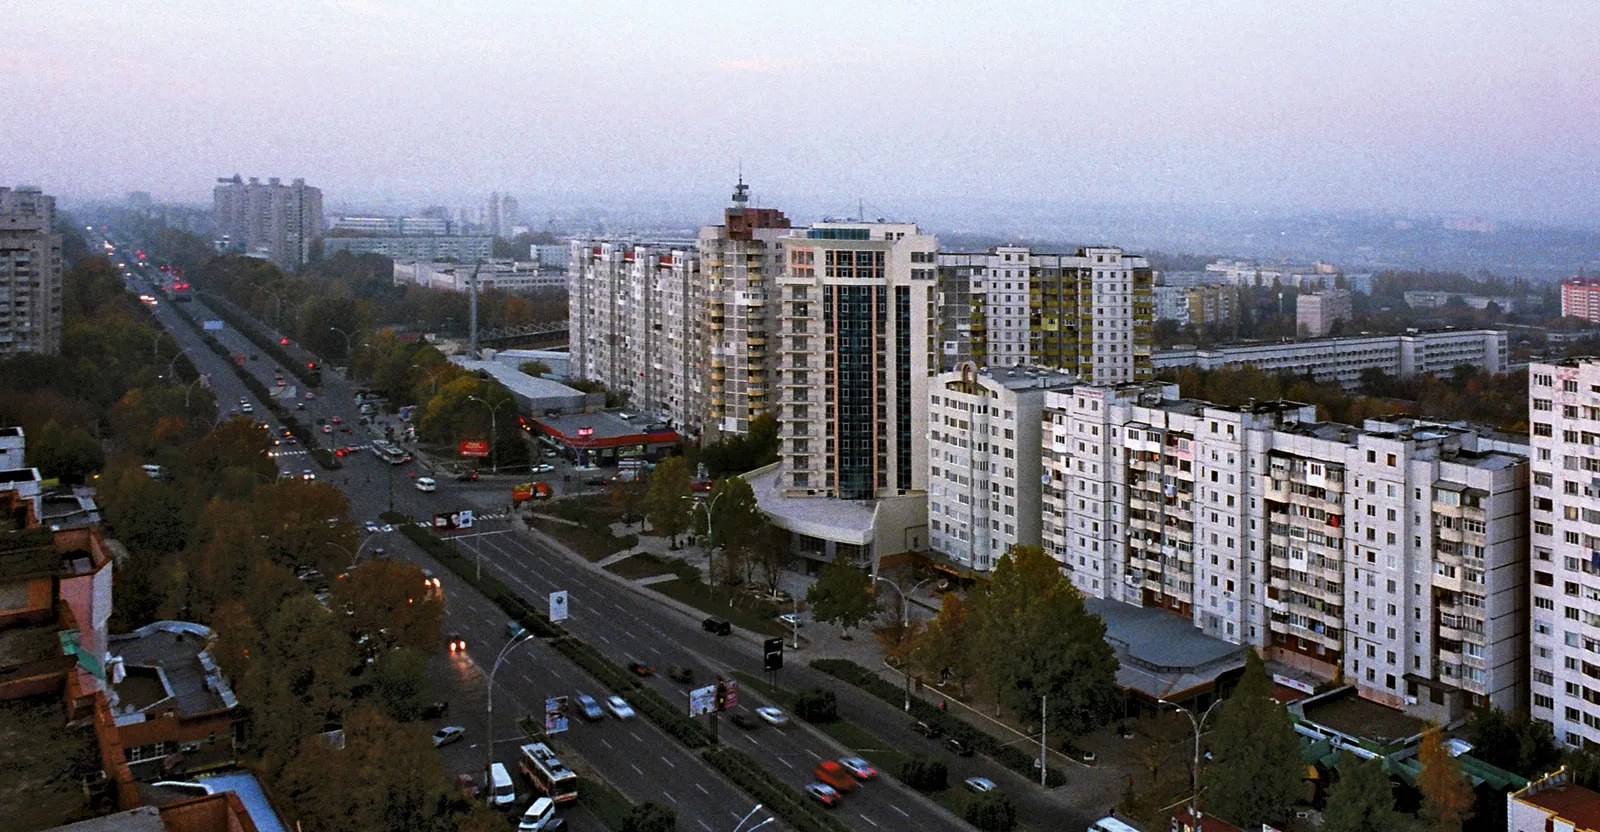 46-facts-about-kishinev